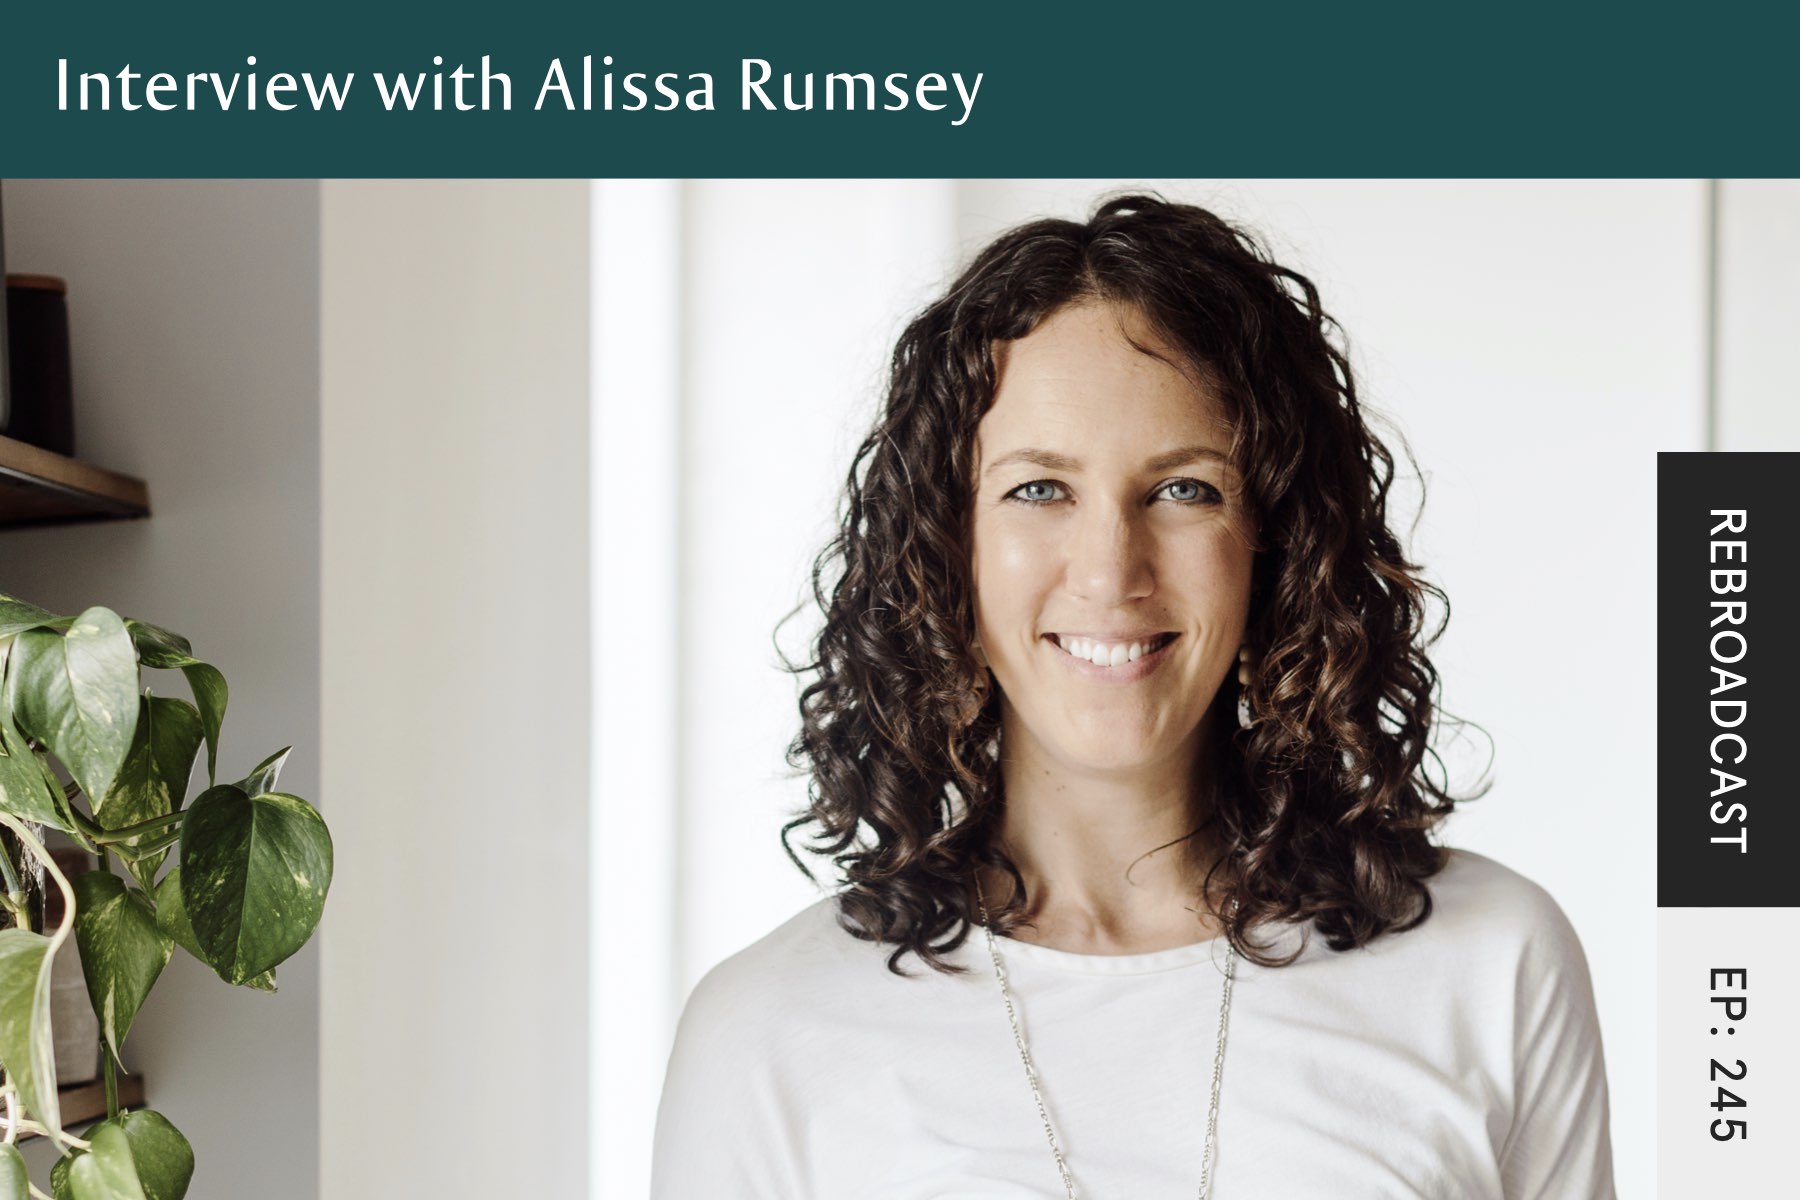 Rebroadcast : Unapologetic Eating, Beauty Ideals, Body Grief and Self-Connection with Alissa Rumsey - Seven Health: Eating Disorder Recovery and Anti Diet Nutritionist